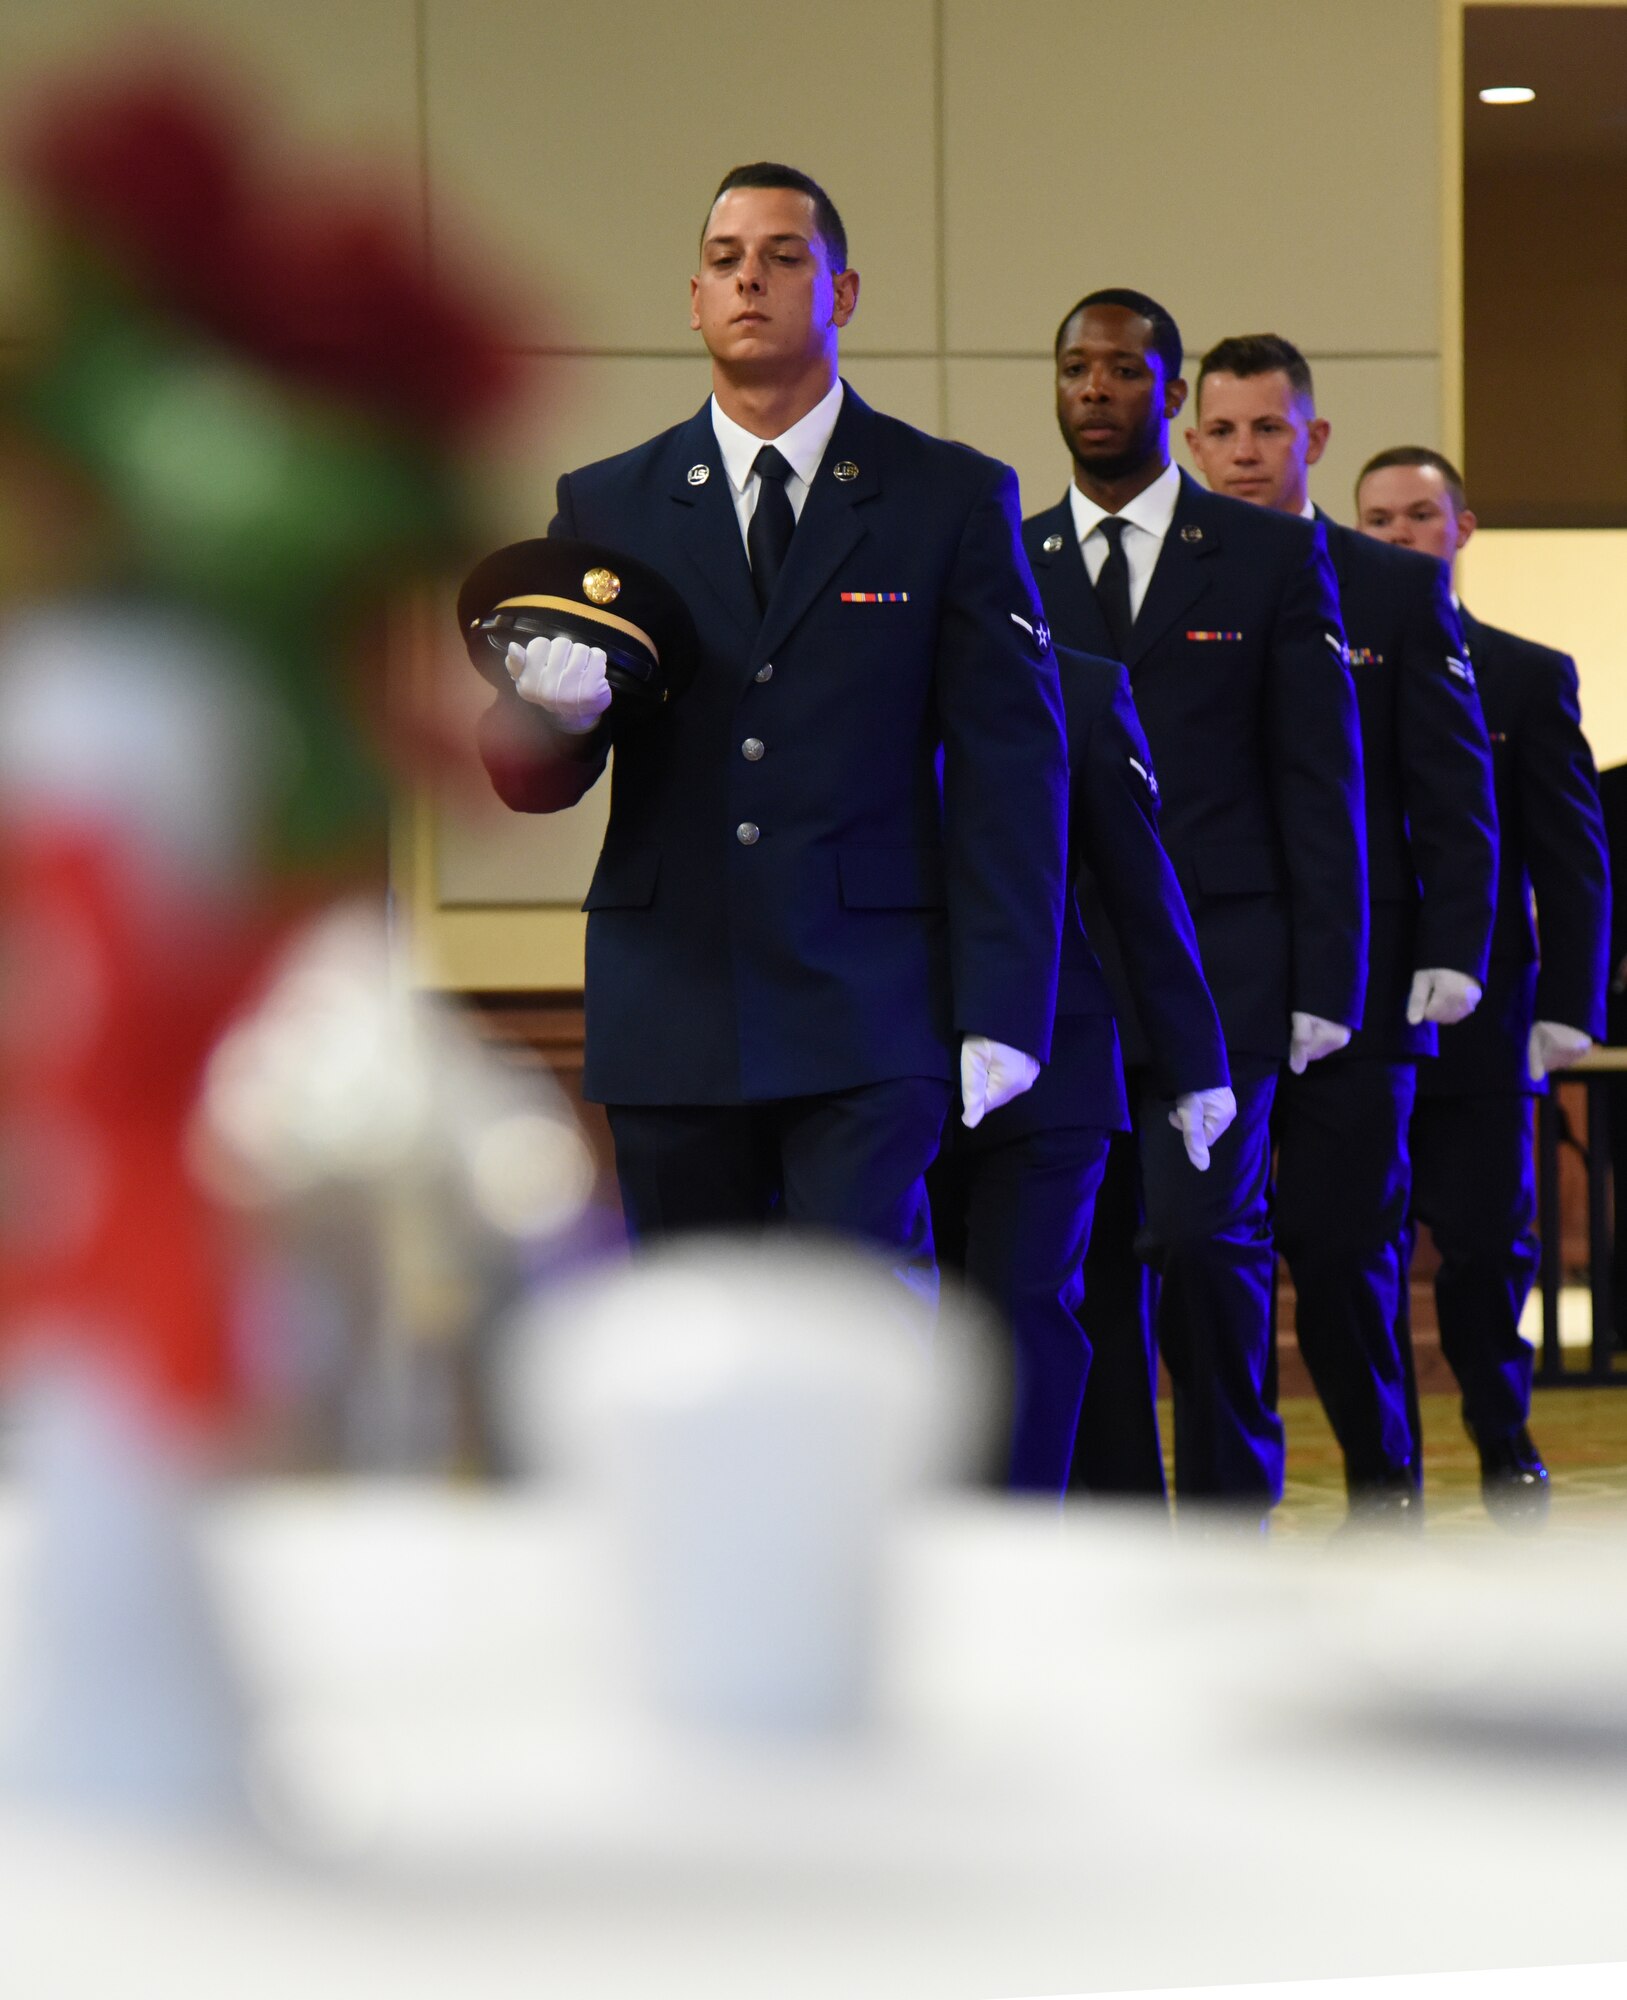 Airmen in the 81st Training Group participate in the POW/MIA table ceremony during the Airmen In Training Ball at the Bay Breeze Event Center on Keesler Air Force Base, Mississippi, April 19, 2019. The event, hosted by the 81st TRG, is the first of its kind and was geared toward training Airmen on how to participate and act during a formal military ball so they can feel confident in their abilities when arriving at their follow-on locations. The Airmen served in key positions throughout the ball such as emcees, color guard, POW/MIA table ceremony, national anthem singer and the invocation. (U.S. Air Force photo by Kemberly Groue)